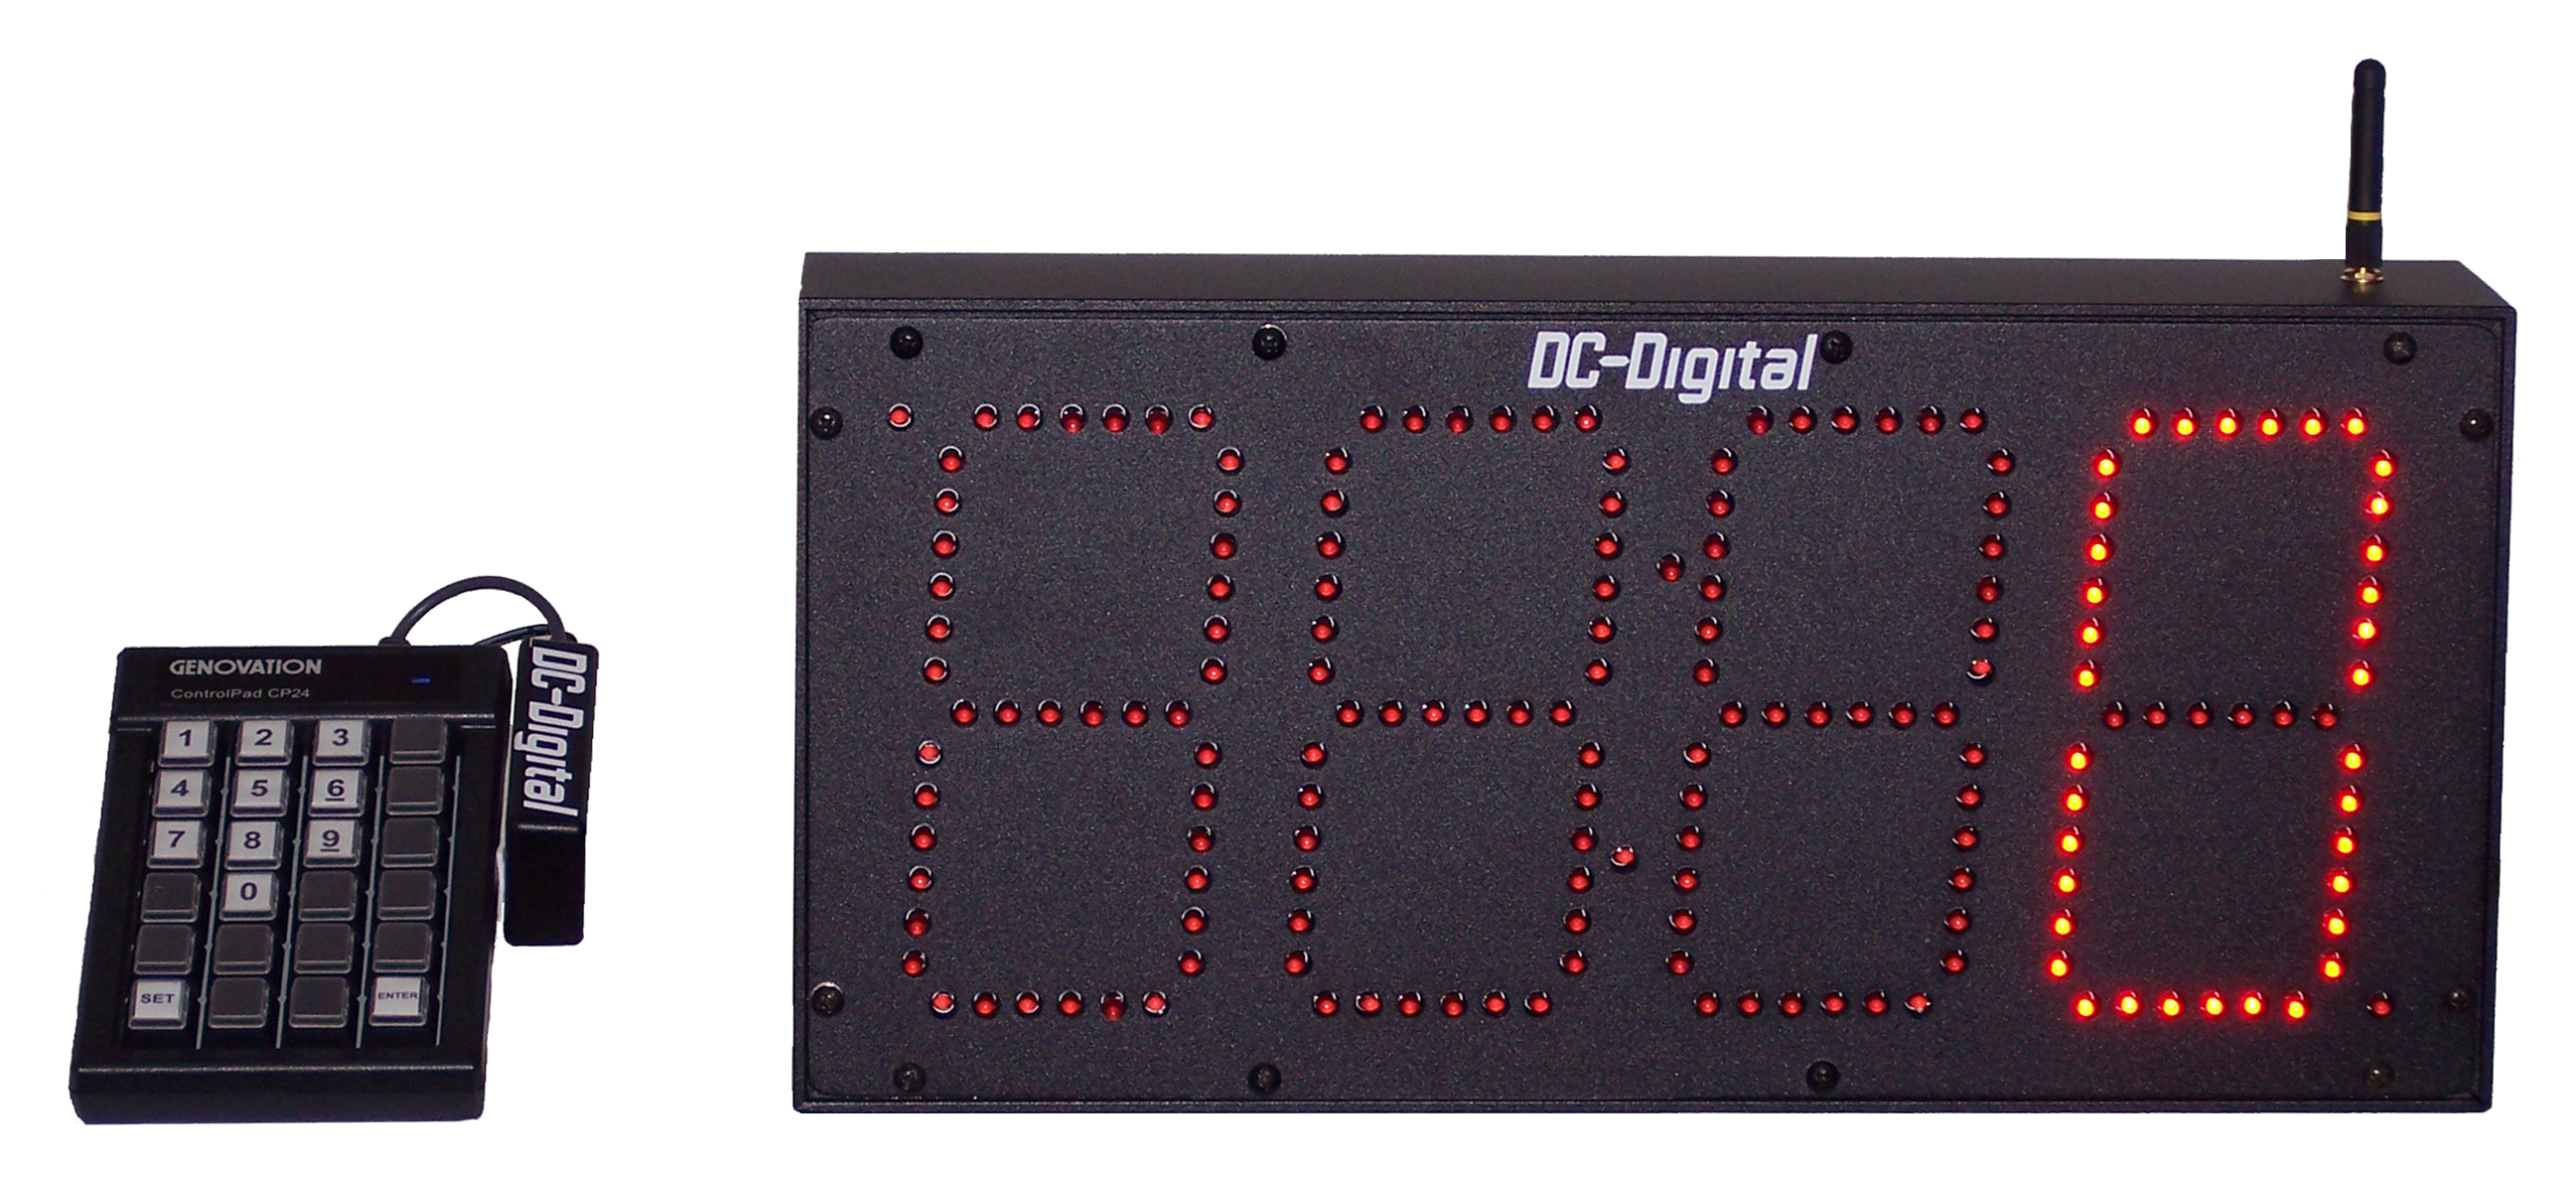 Instantly and easily display any 4 digit number DC-60 -Static-RF-Wireless-Keypad Entry